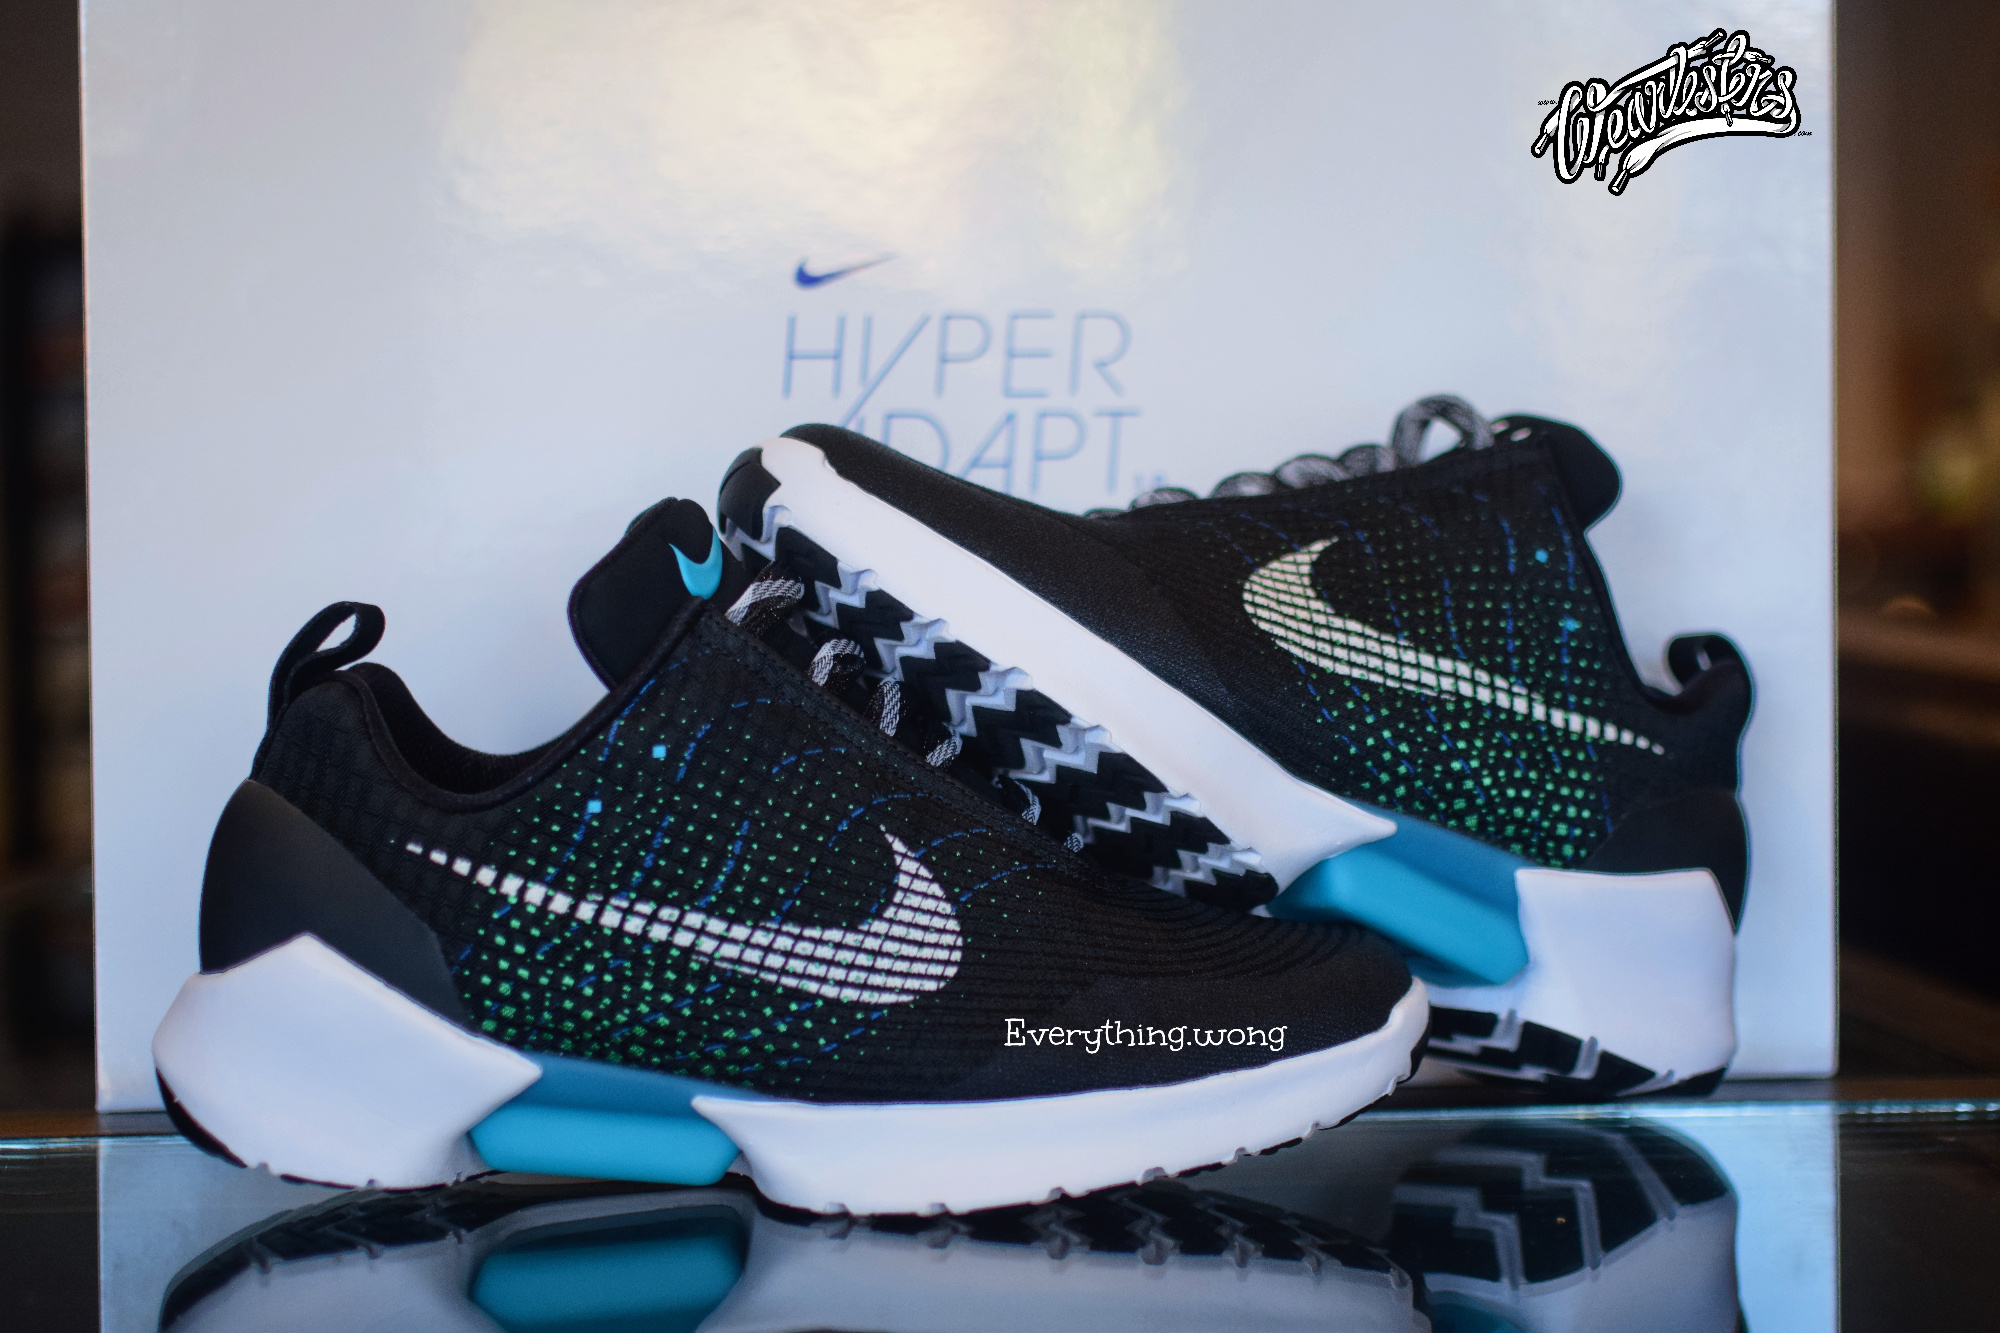 A Detailed Look at the Nike HyperAdapt 